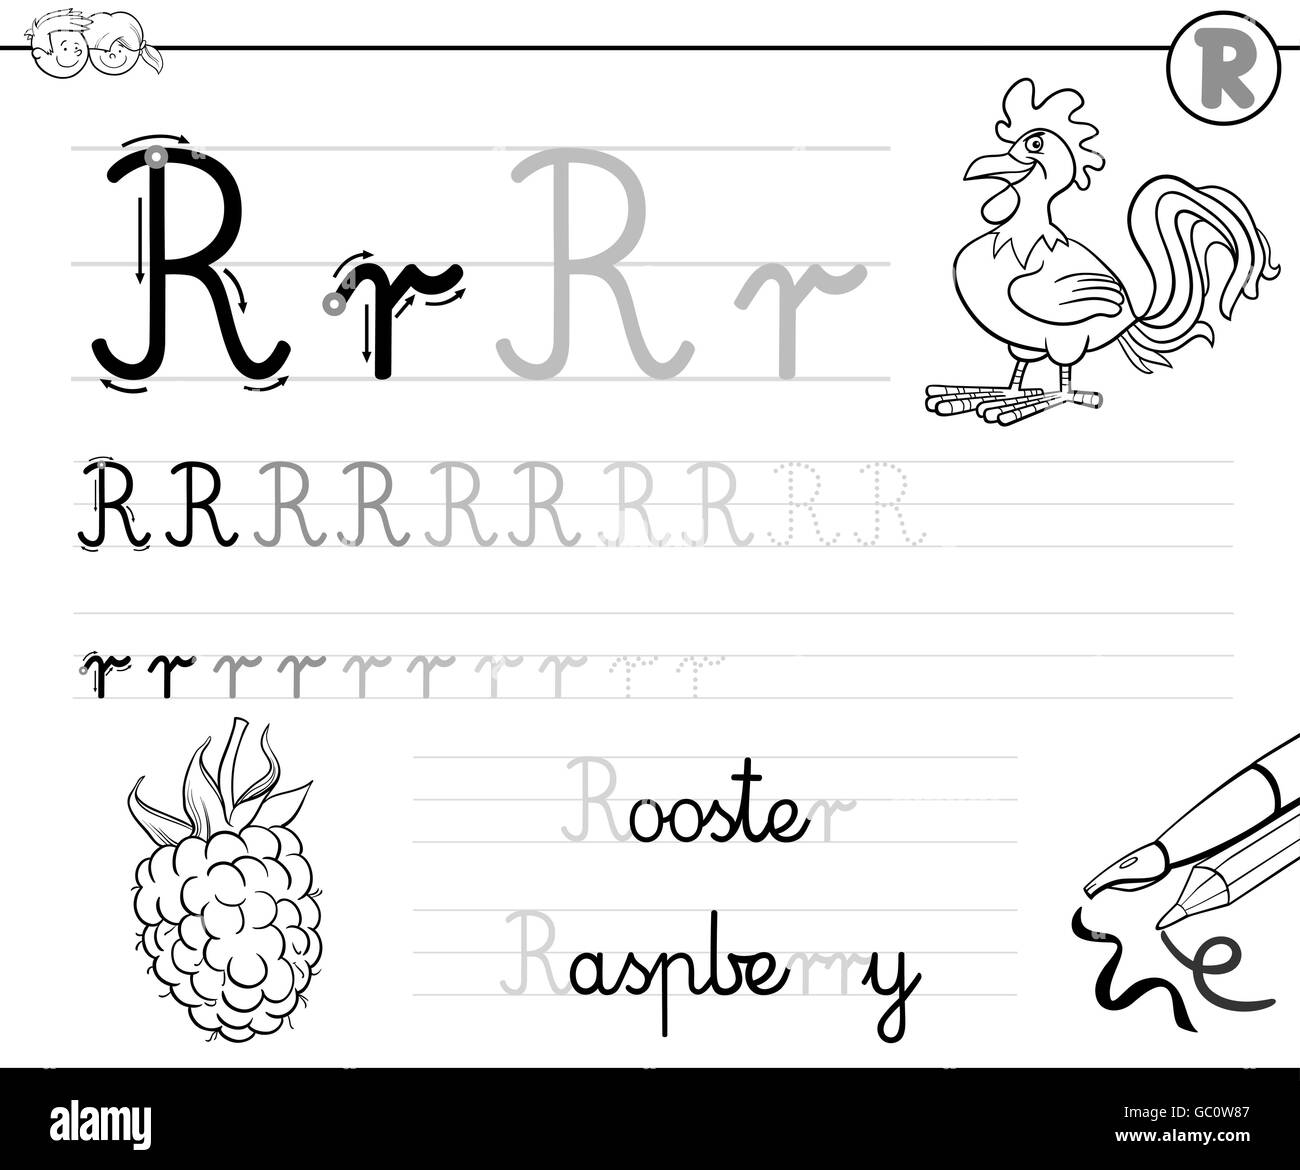 Black and White Cartoon Illustration of Writing Skills Practice with Letter R Worksheet for Children Coloring Book Stock Vector